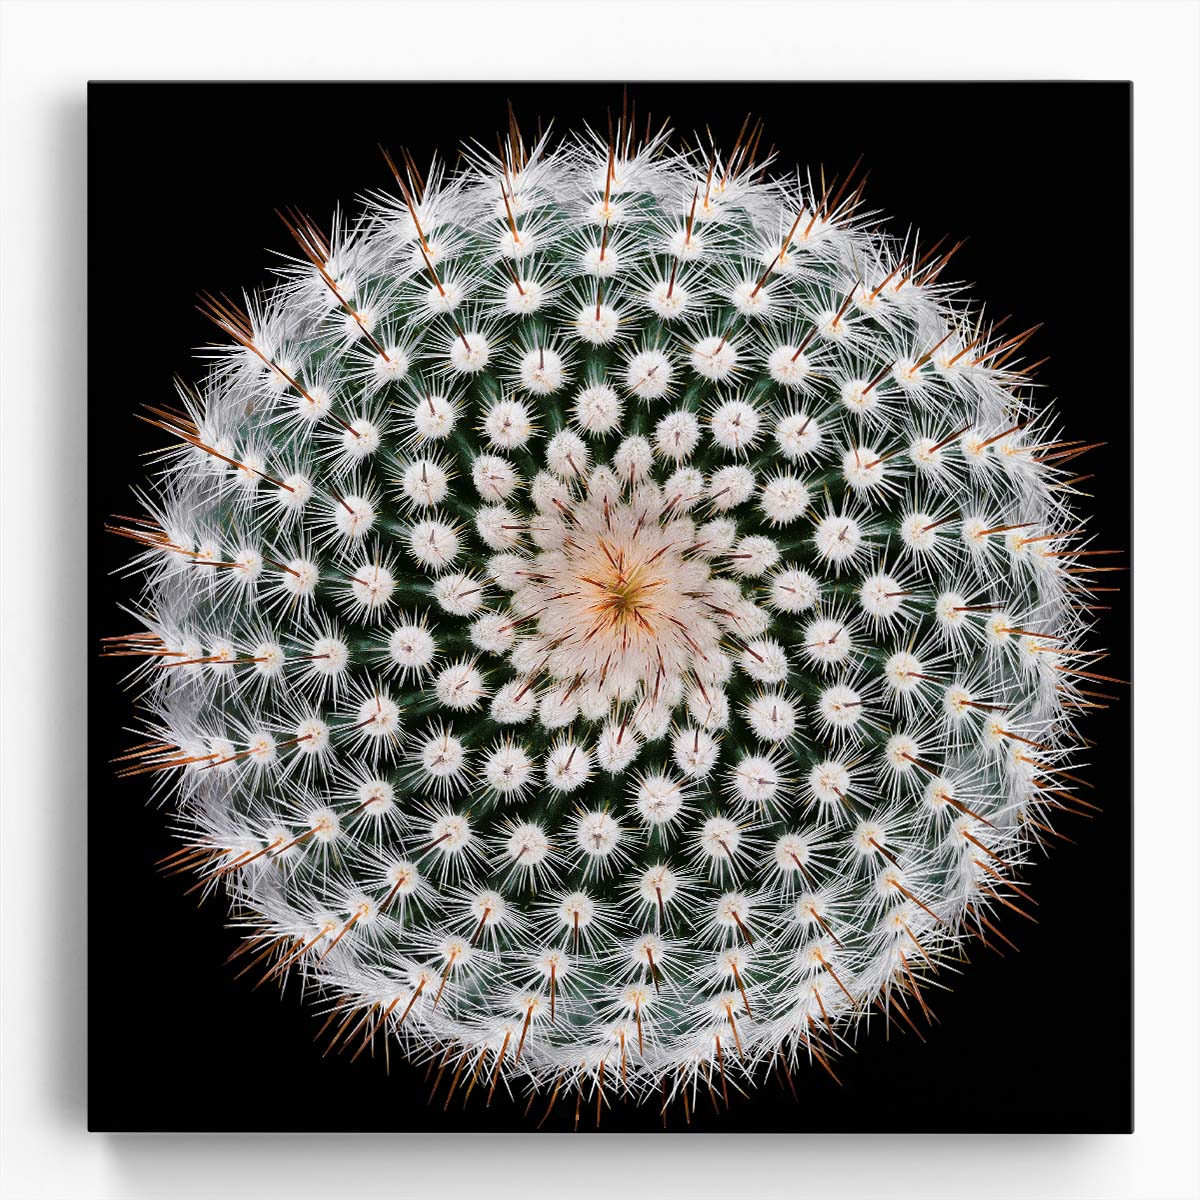 Symmetrical Silver Ball Cactus Macro Botanical Photography Wall Art by Luxuriance Designs. Made in USA.